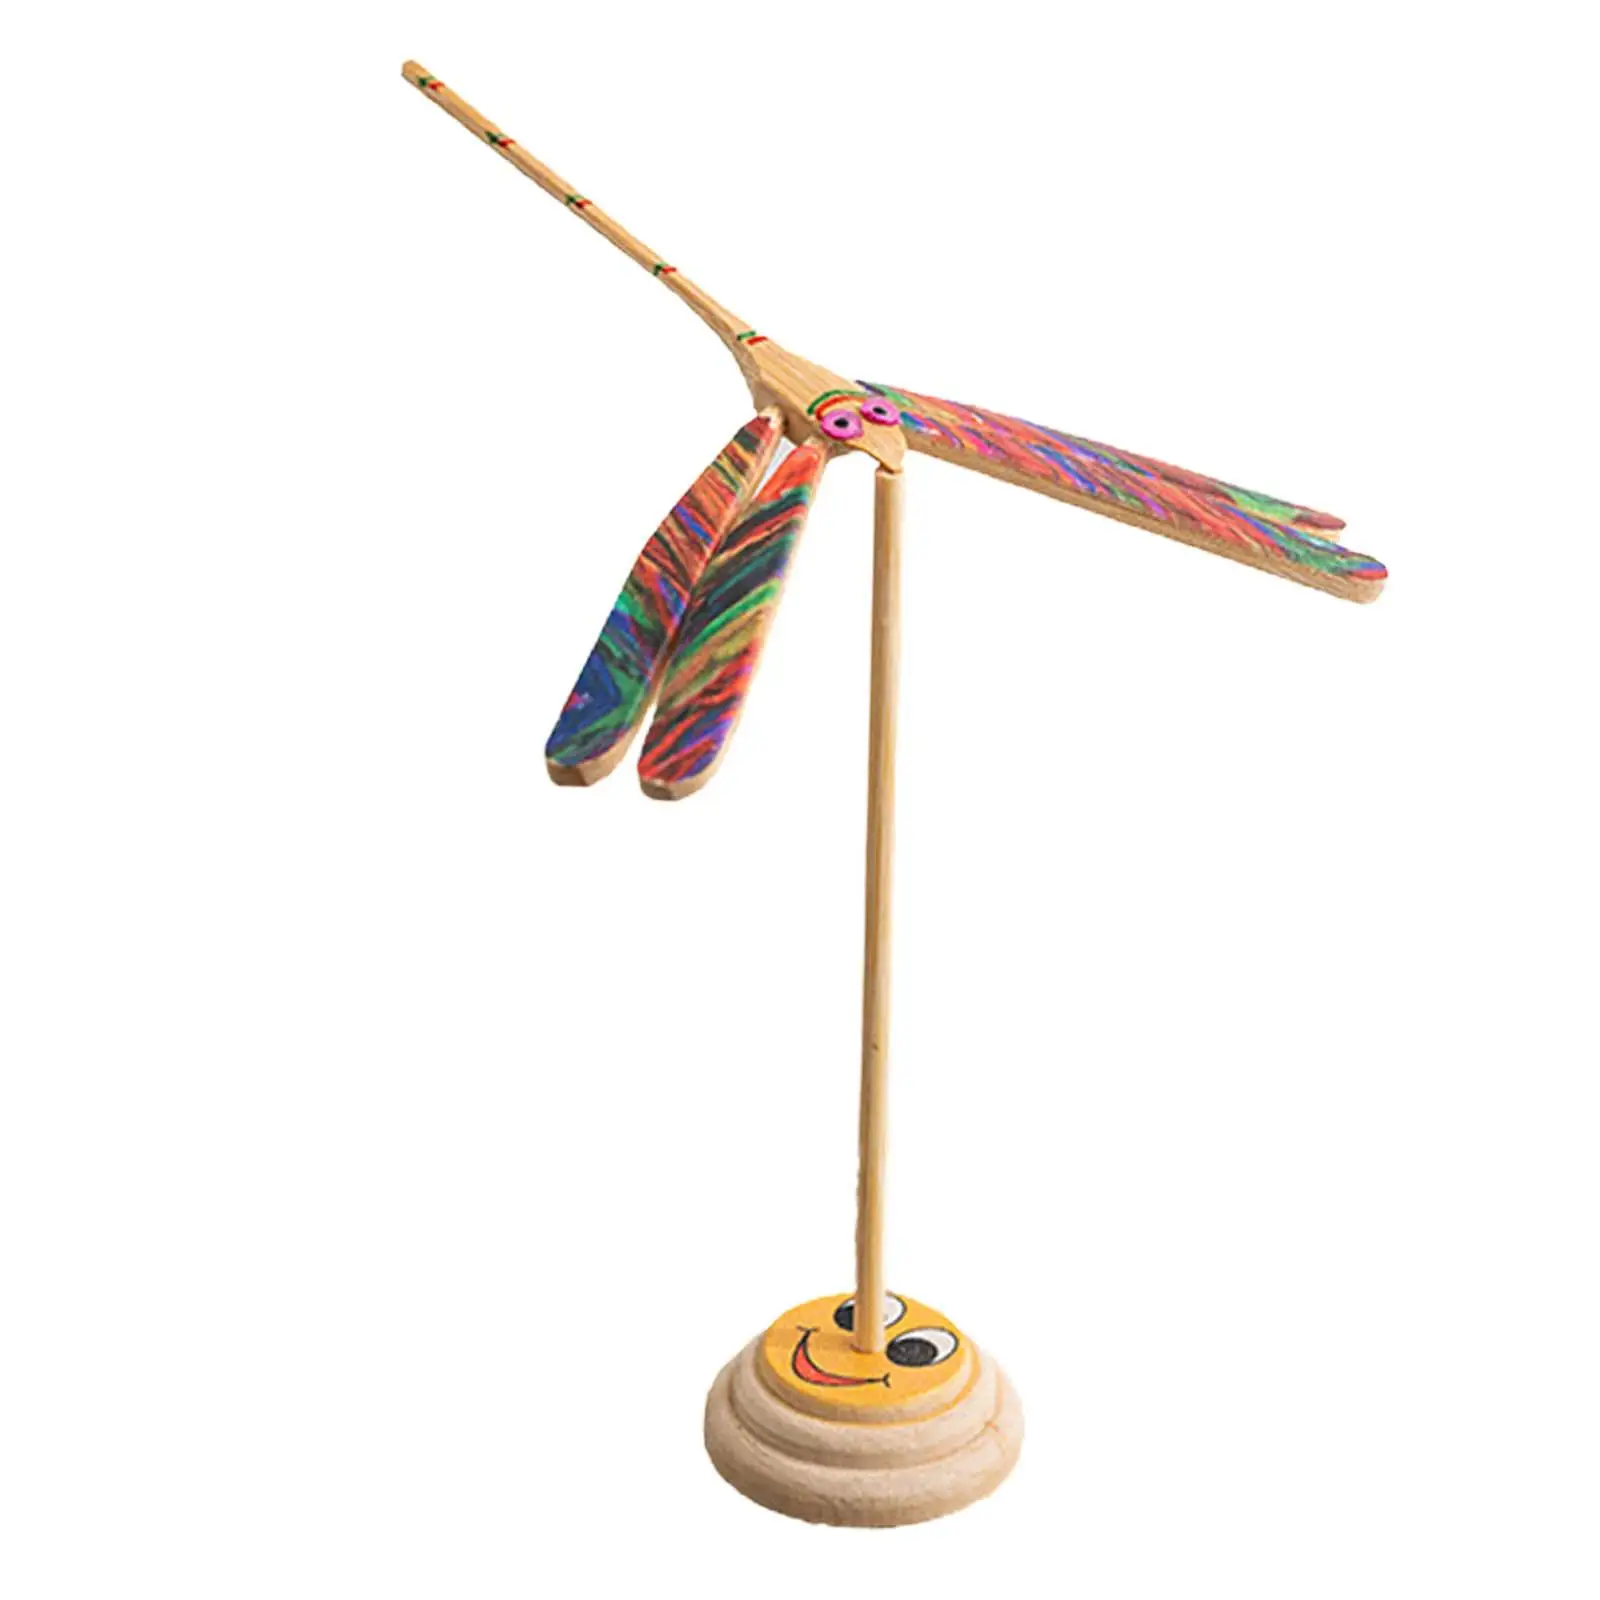 Bamboo Dragonfly Toy Nostalgic Handmade Desktop Decoration Balancing Dragonfly for Aniversary Party Favor Countertop Bedroom